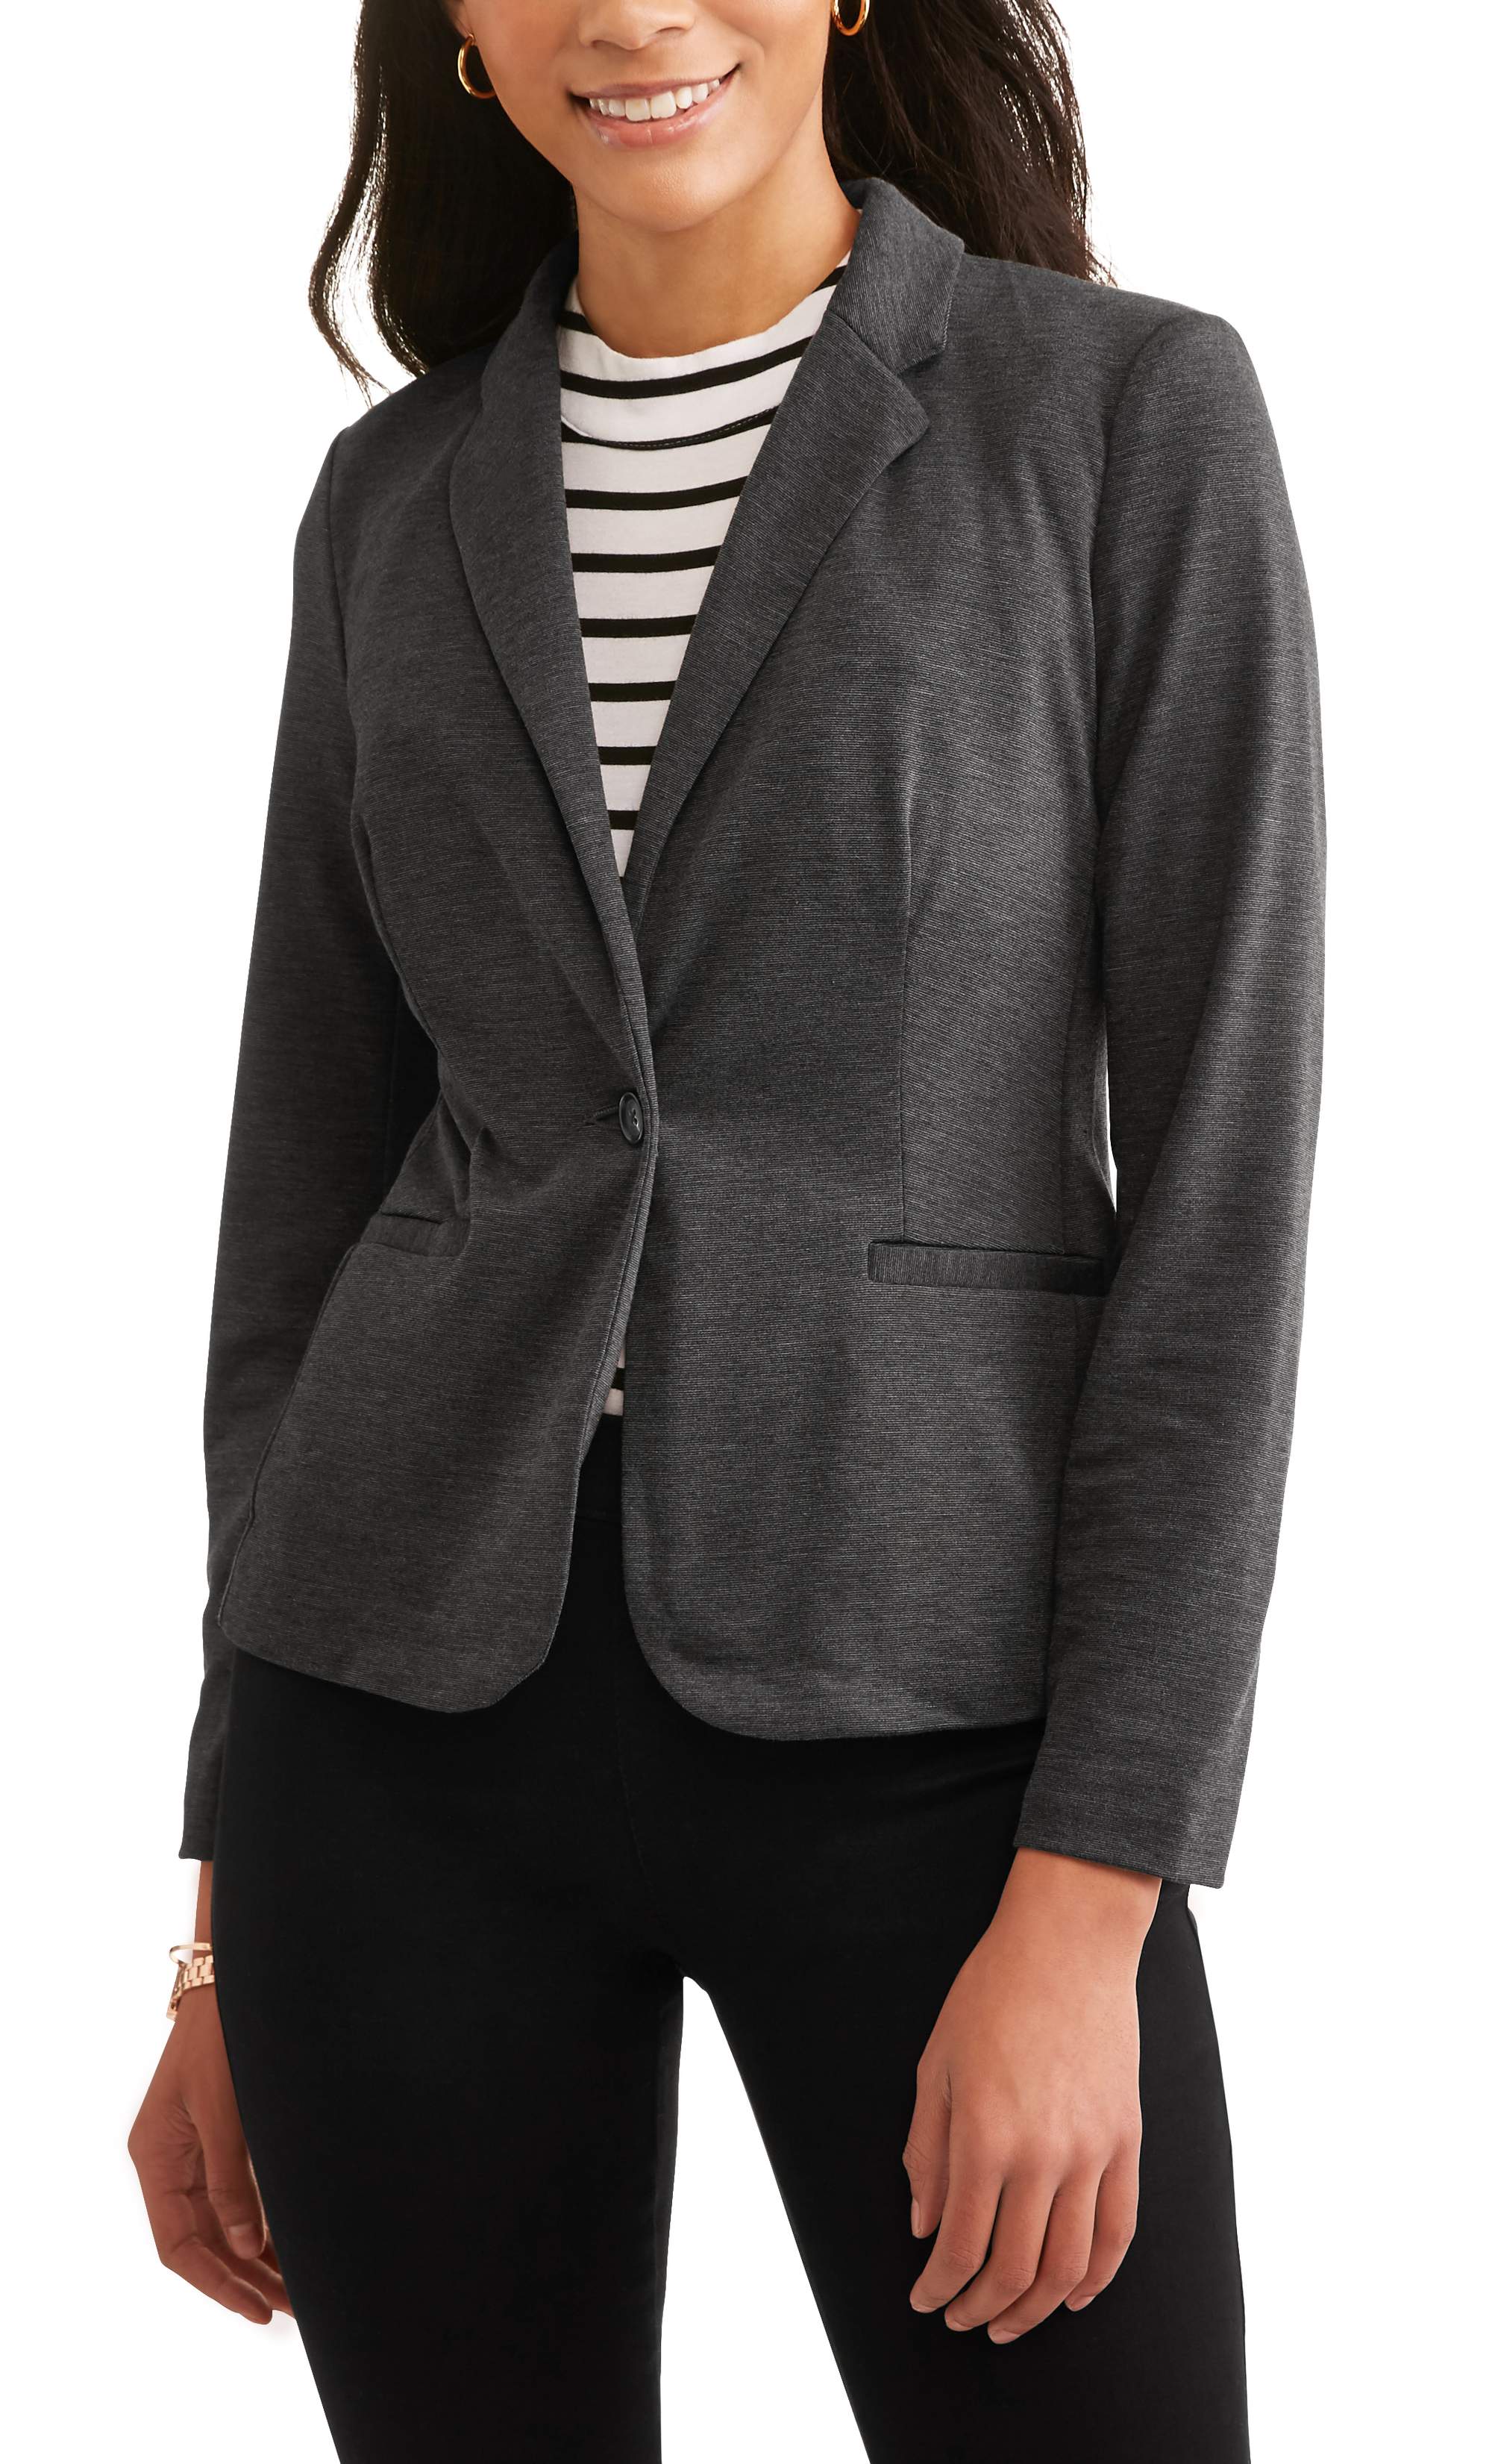 Women's Ponte Suiting Jacket - image 1 of 5